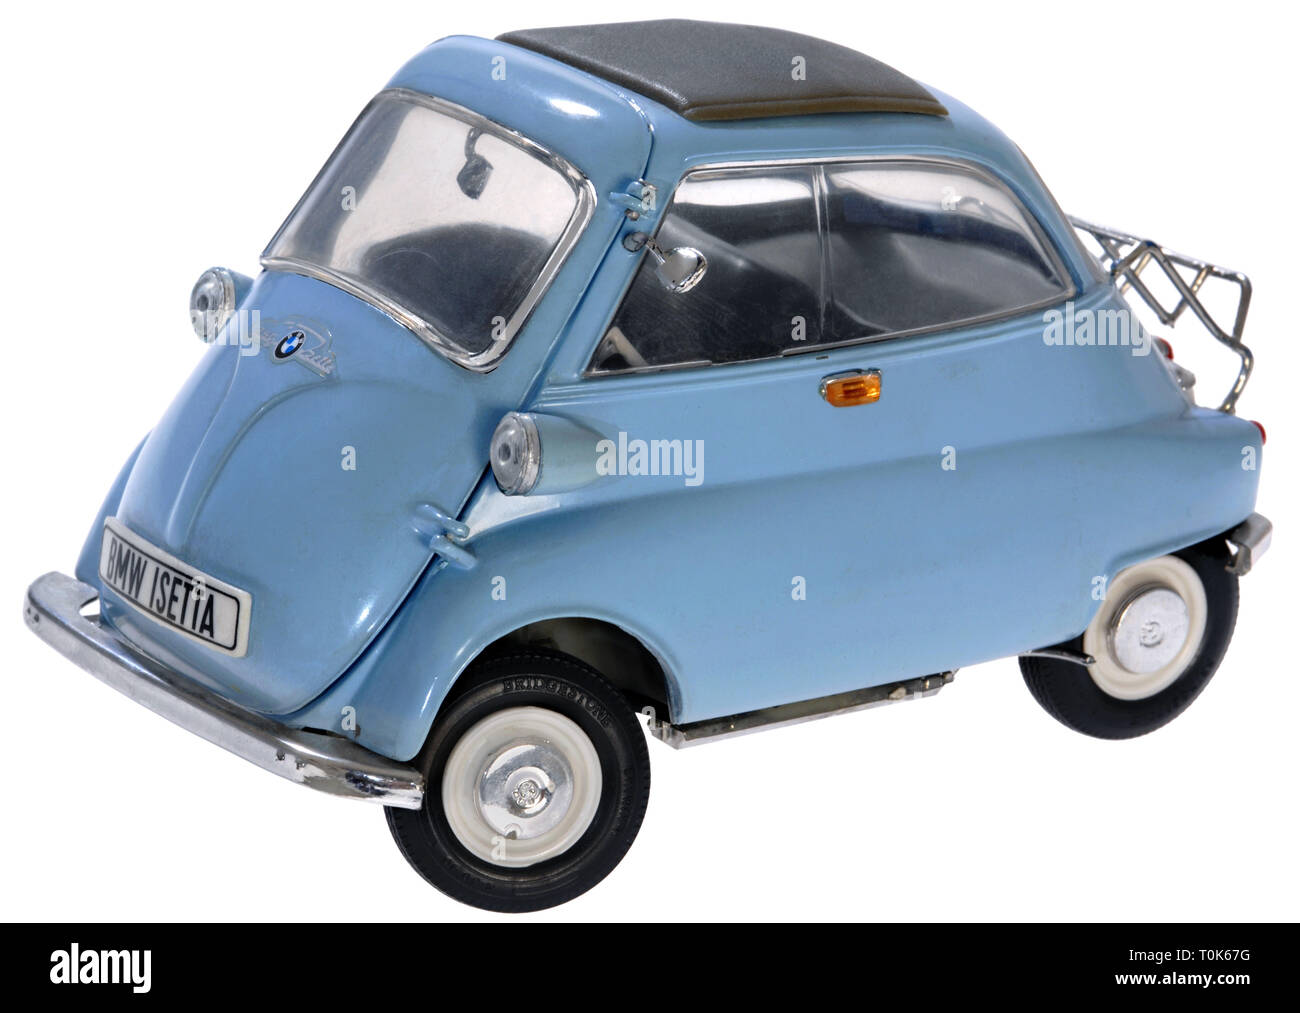 transport / transportation, car, vehicle variants, BMW, BMW Isetta, version 250, Motocoup, car was produced from 1955 until 1962, only one door, twoseater, motorcycle engine, 250 cubic centimetre, 12 horsepower, mono cylinder four-stroke engine, maximum speed: 85 kmph, turning circle: circa 8m, fuel consumption: 3.8l / 100 km, length: 2.285m, width: 1.38m, folding roof, original price 1955: DM 2550, sheet steel car body, light-blue, empty weight: 350 kilogram, Germany, 1955, Additional-Rights-Clearance-Info-Not-Available Stock Photo